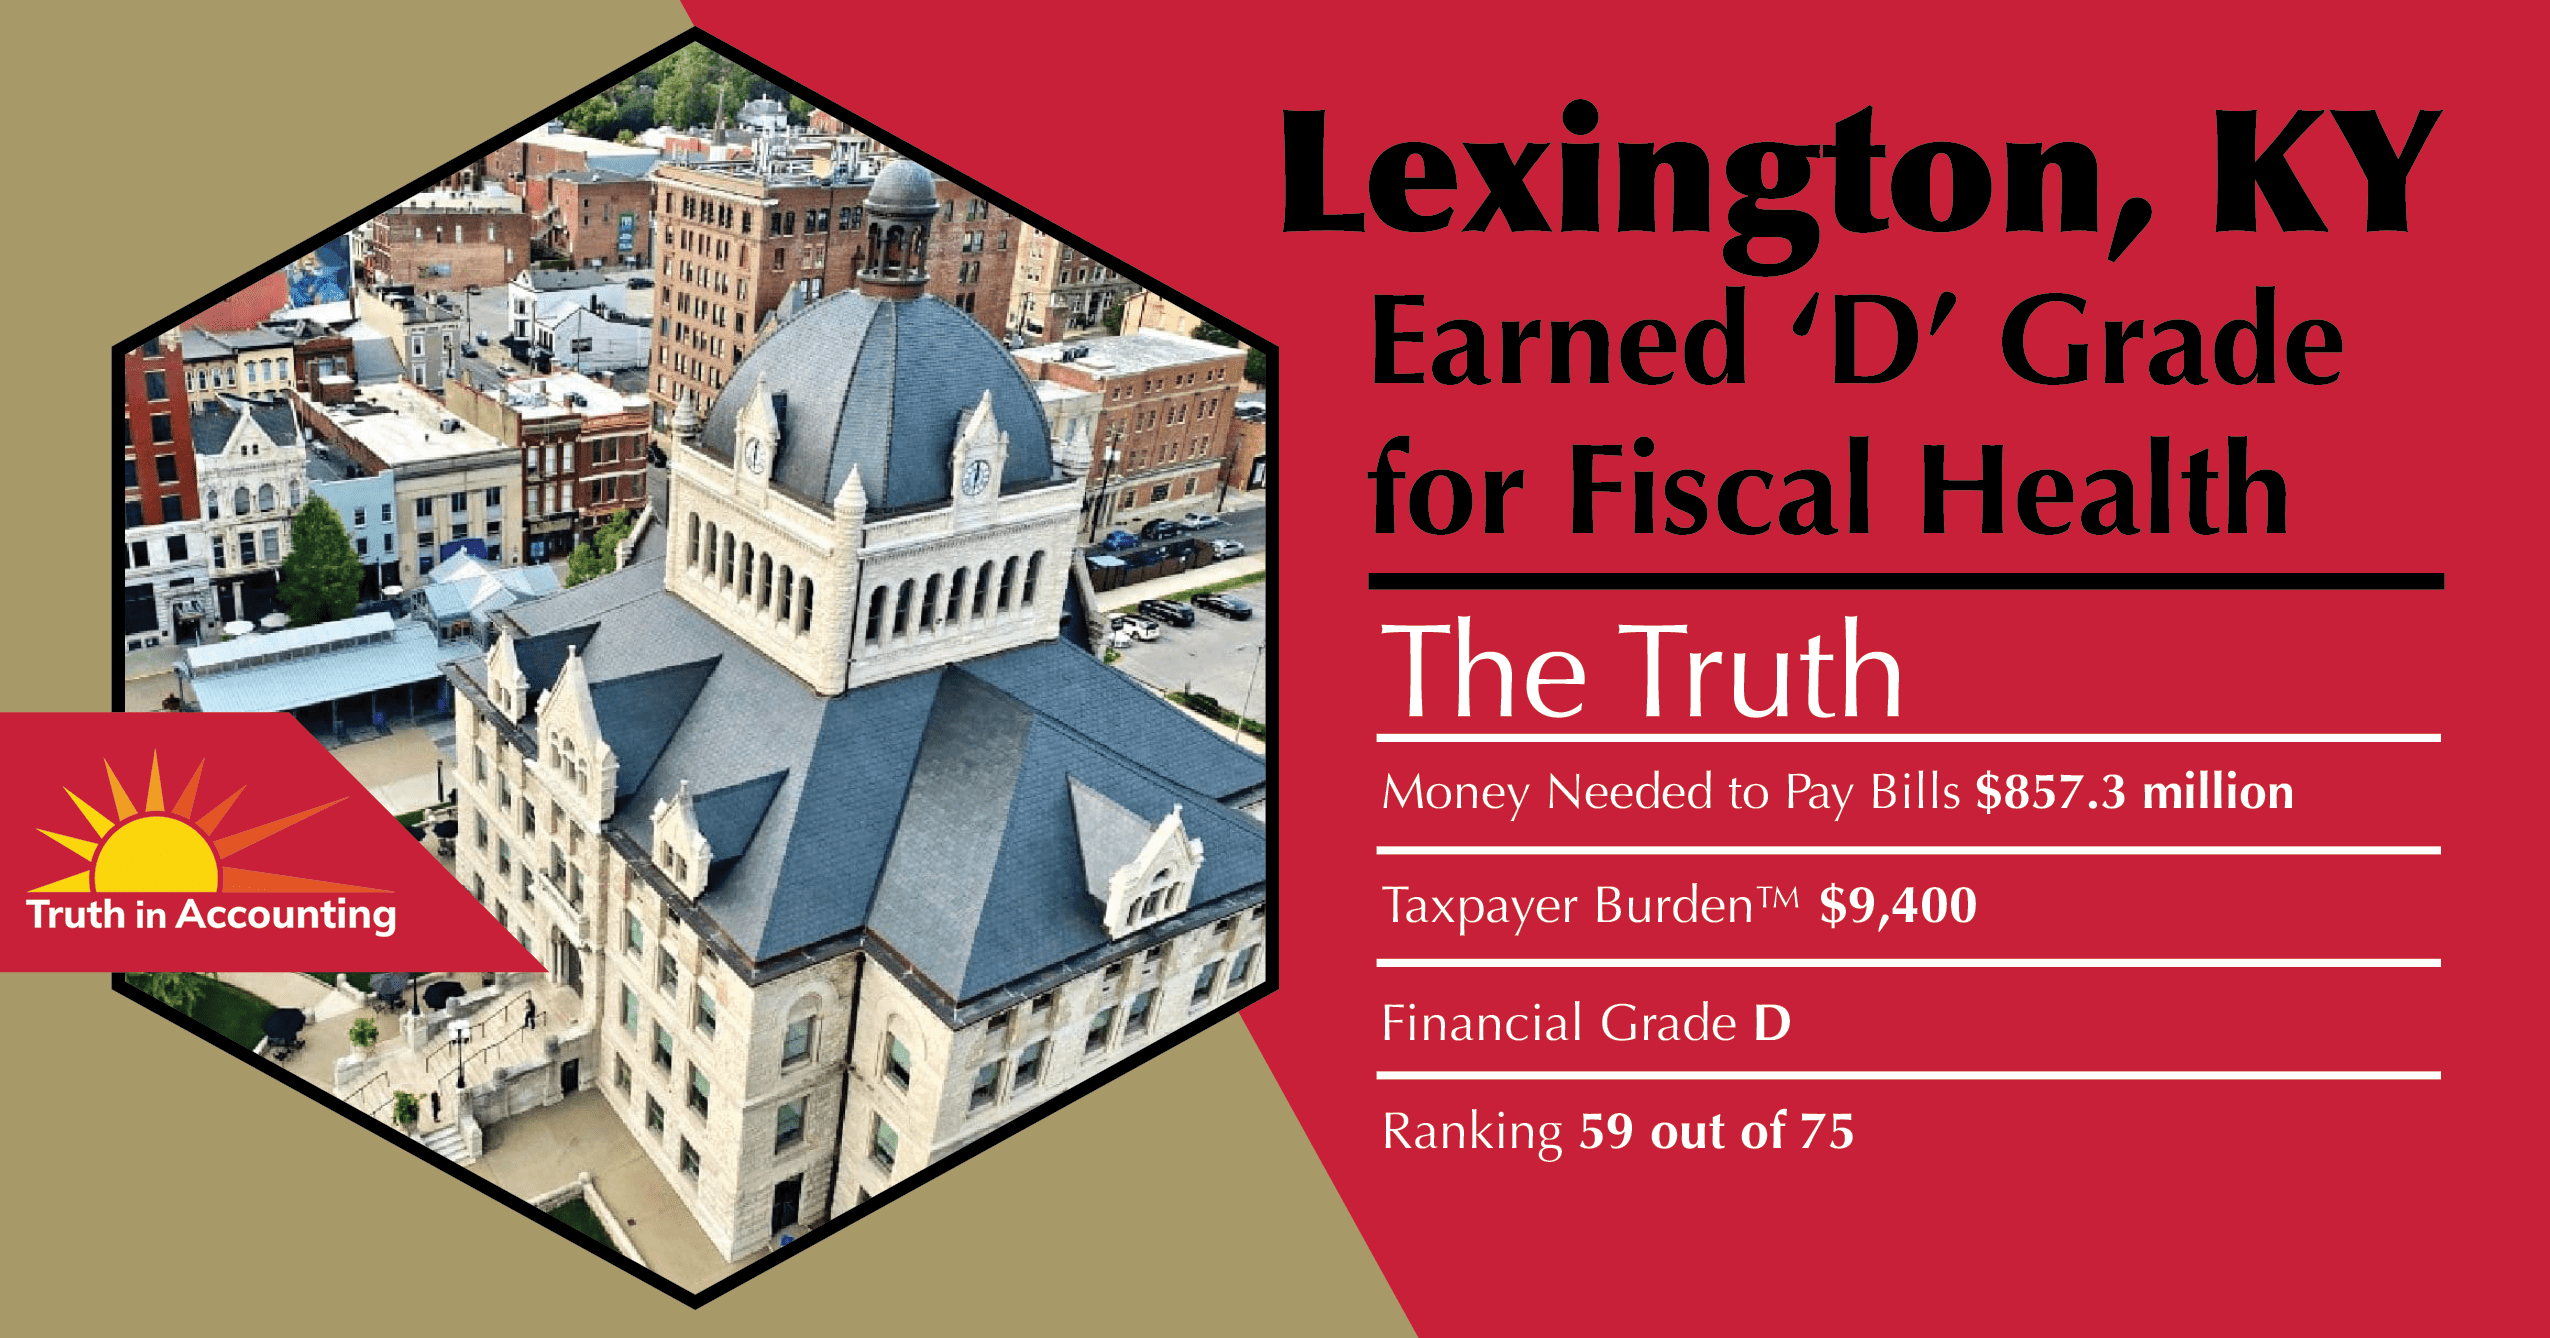 Lexington Receives a "D" Grade for Fiscal Health - Accounting Watchdog Calls it a "Sinkhole City"